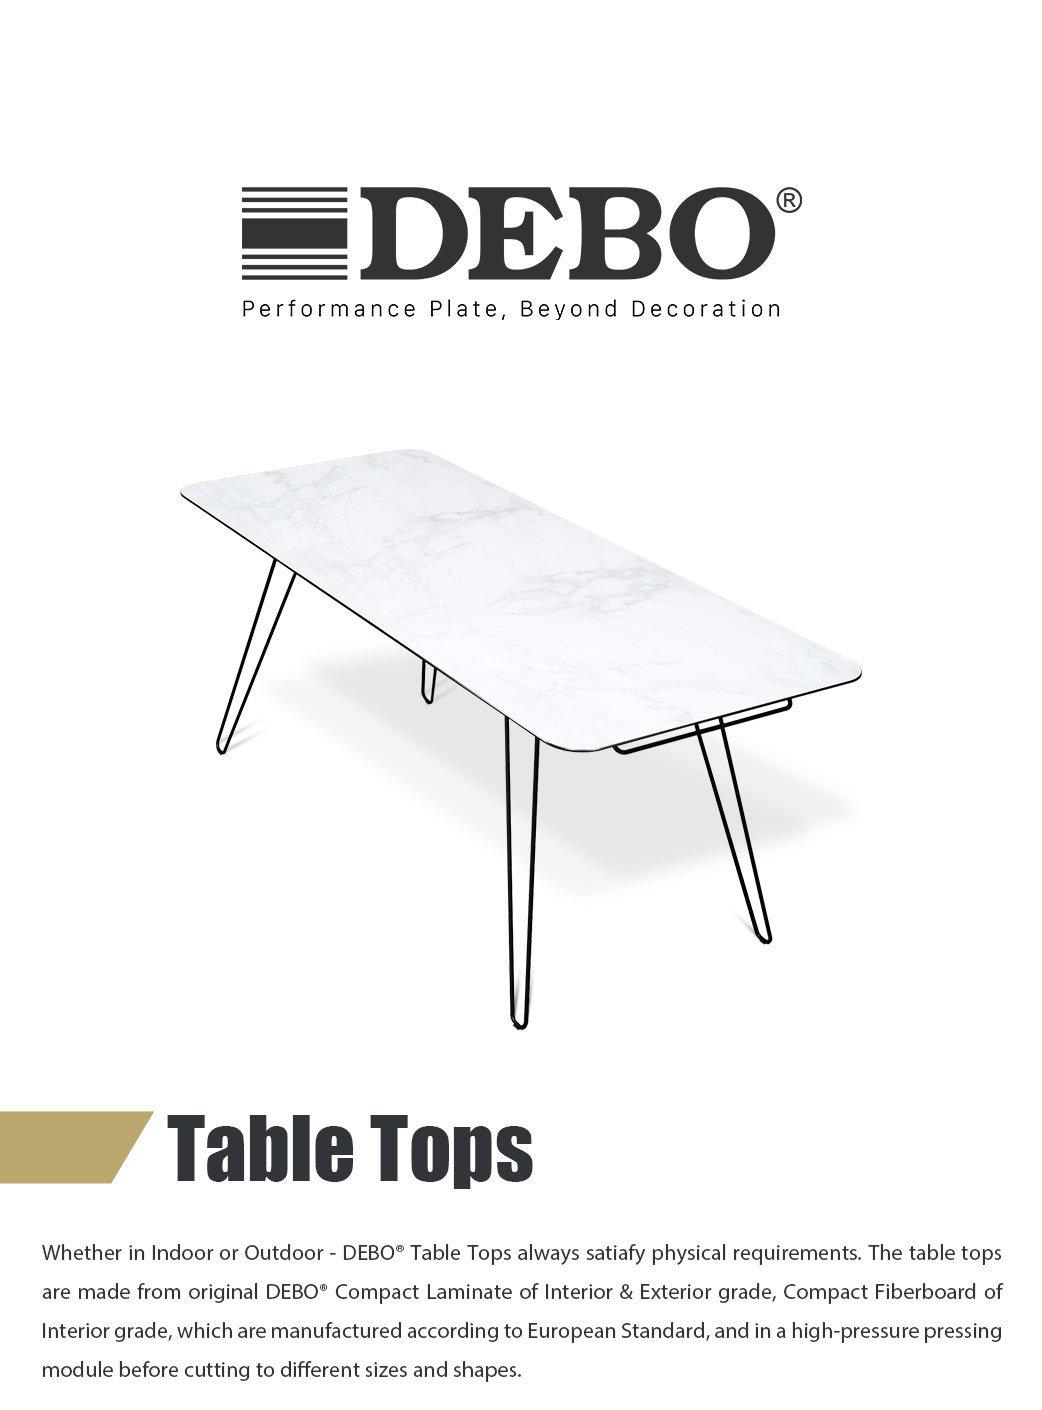 Office Furniture Debo Easy Clean HPL Compact Laminate Desk and Table